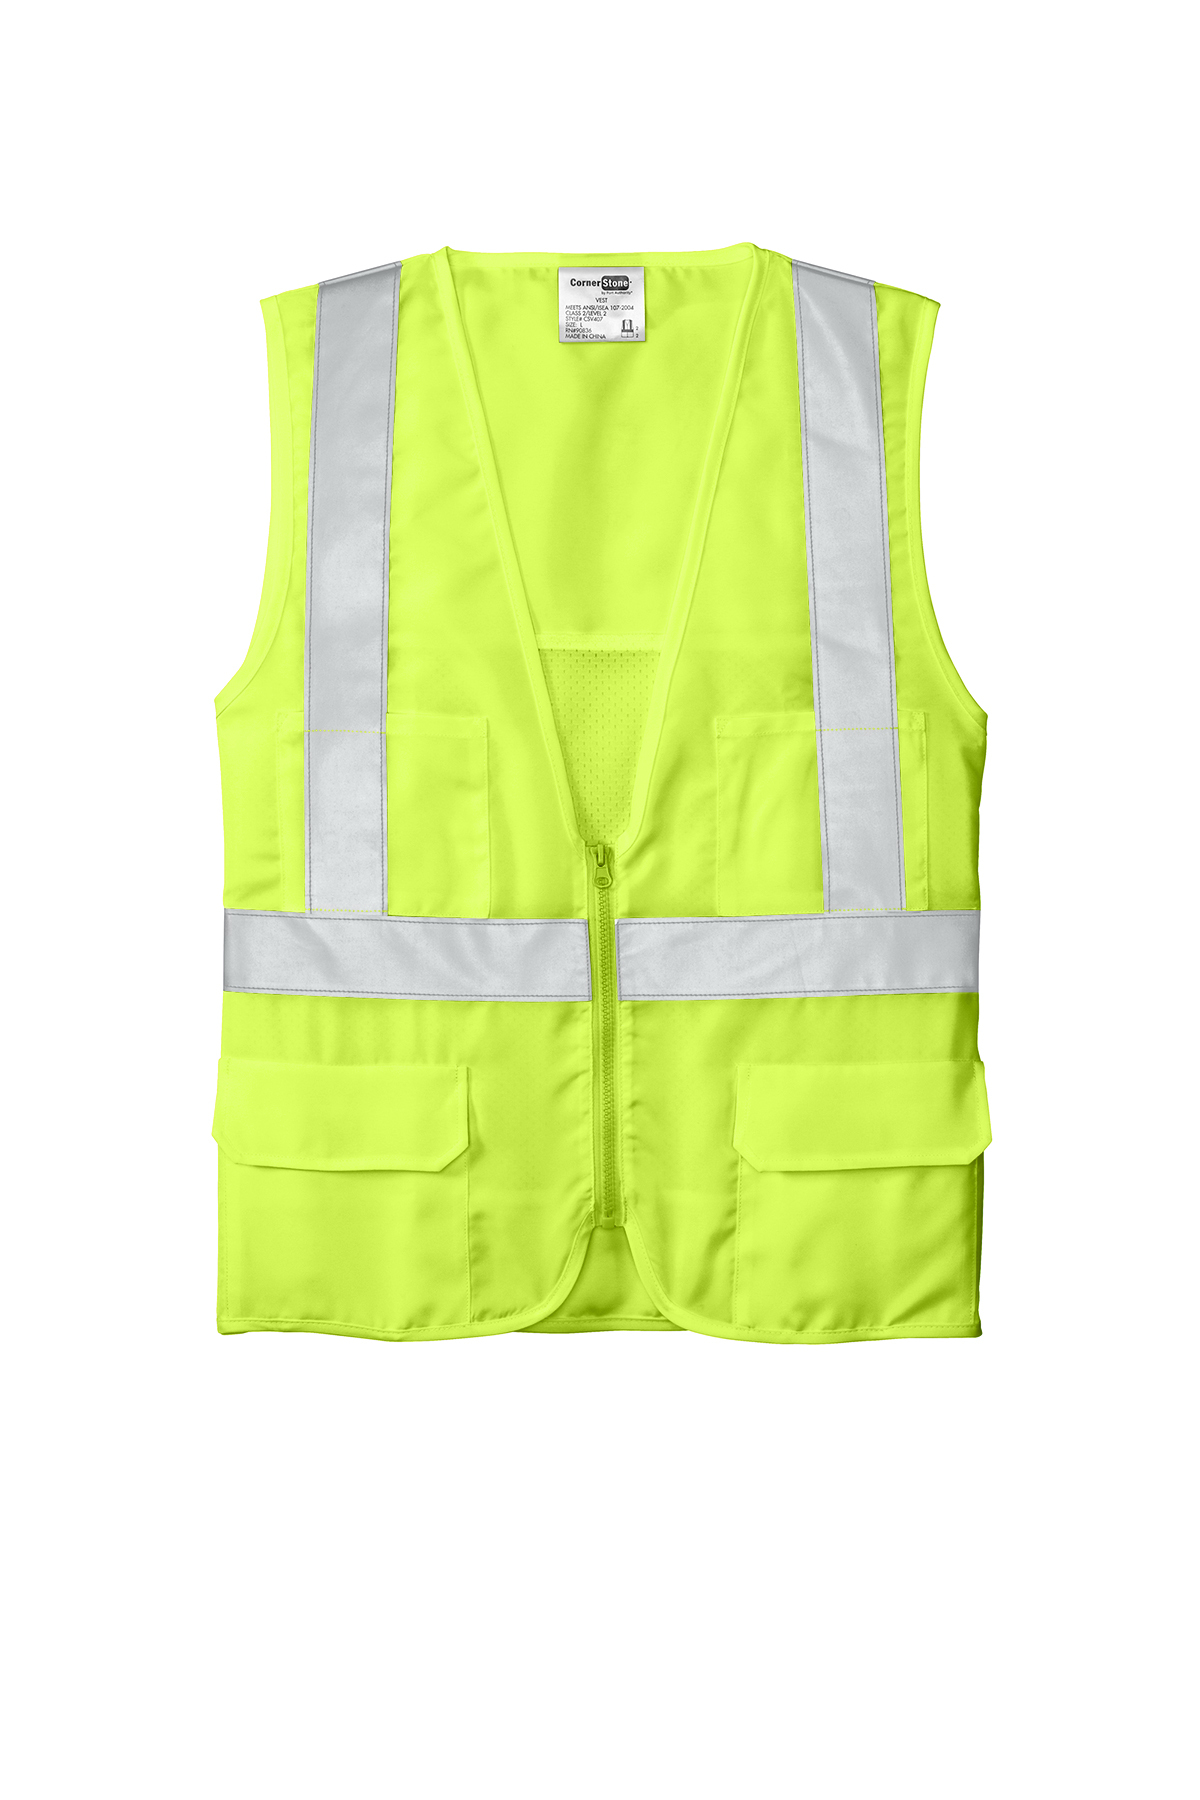 Civil Air Patrol Lime Yellow Reflective Vest for Supervisors - ANSI Class  II Approved